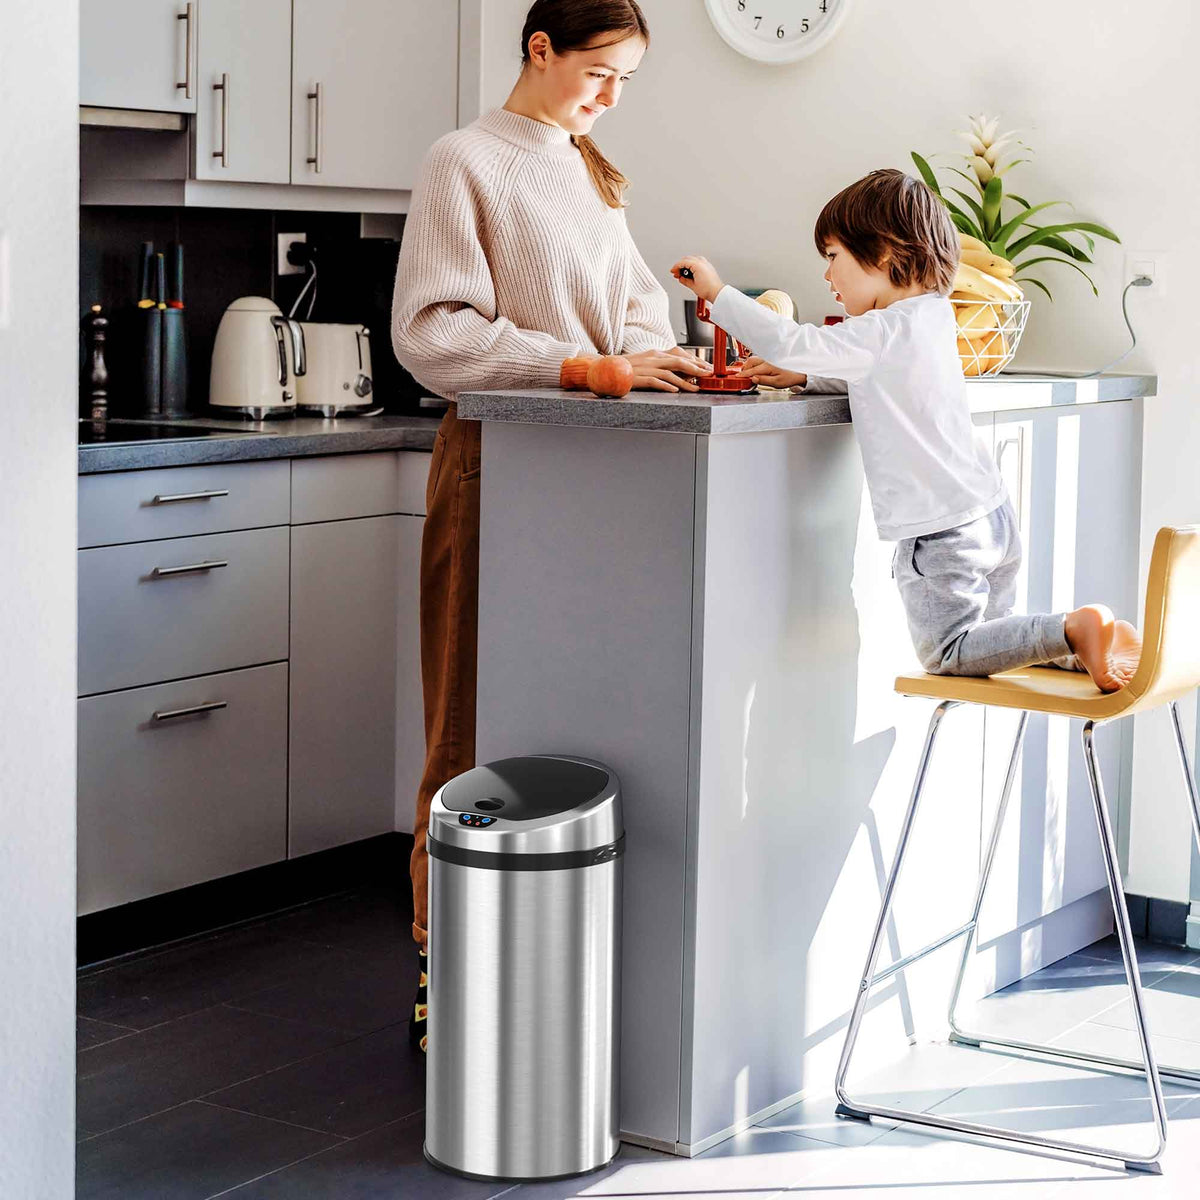 iTouchless 8 Gallon Stainless Steel Sensor Trash Can with Odor Filter in kitchen